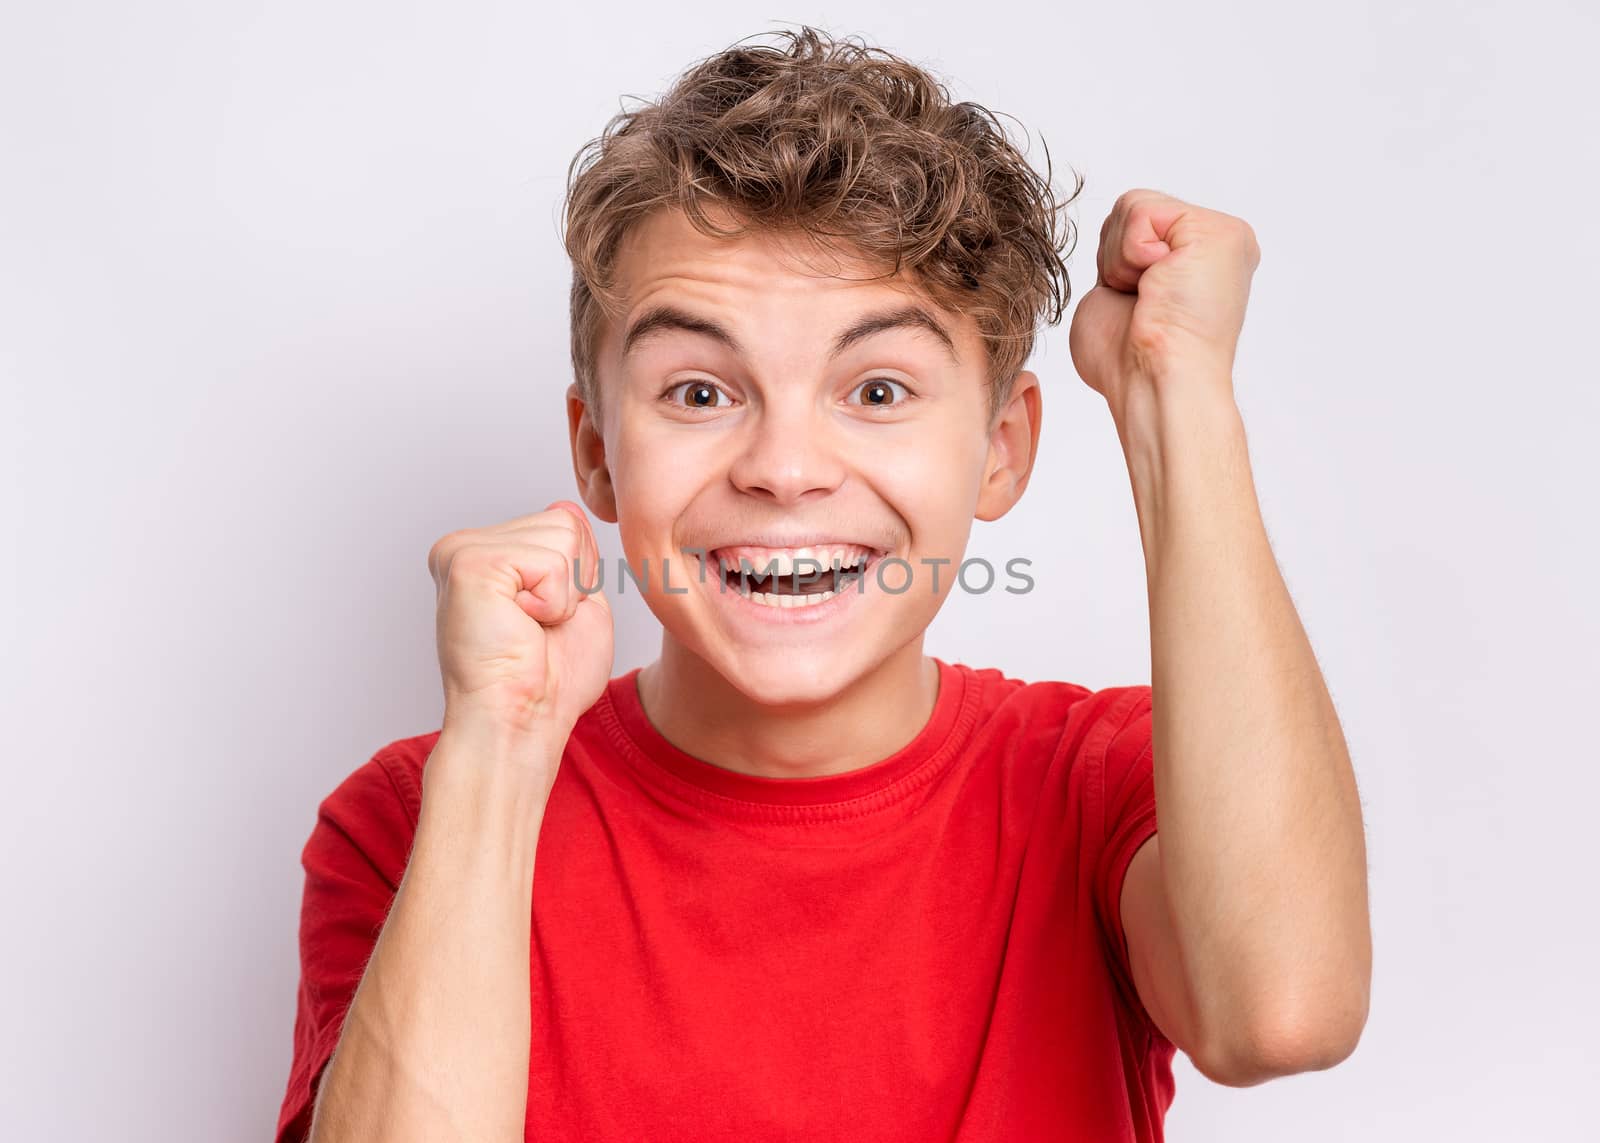 Portrait of teen boy happy and excited expressing winning gesture. Successful and celebrating victory, triumphant child on grey background.